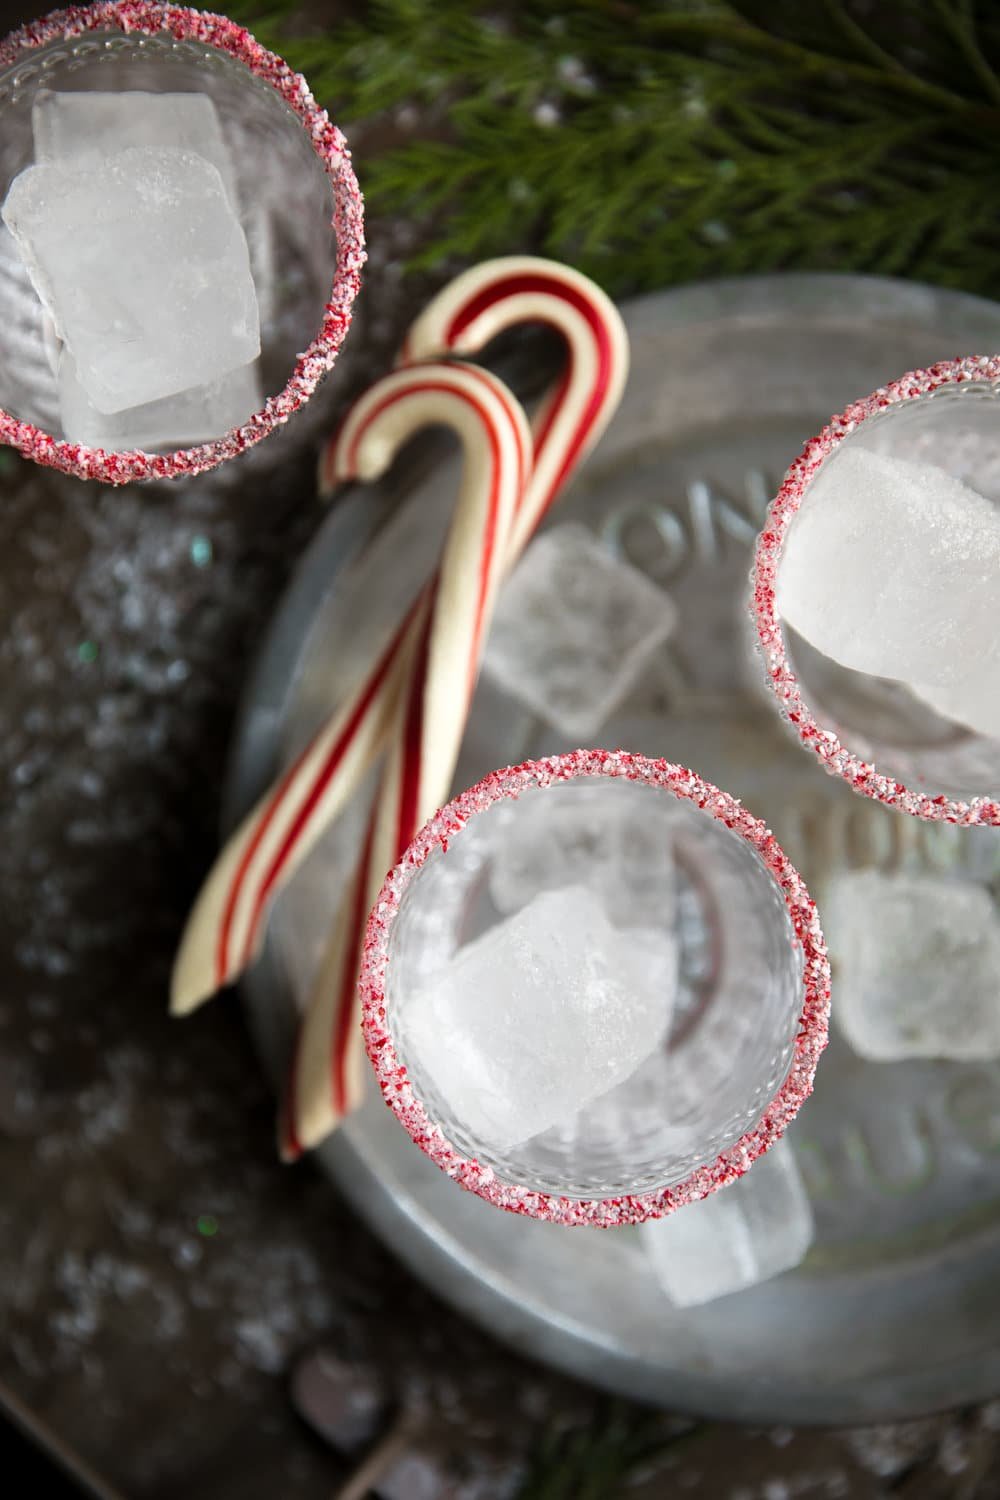 Holiday Peppermint White Russian. Made with Kahlúa, Peppermint Schnapps, and Vodka, this delicious cocktail is perfect for the cold holiday season.